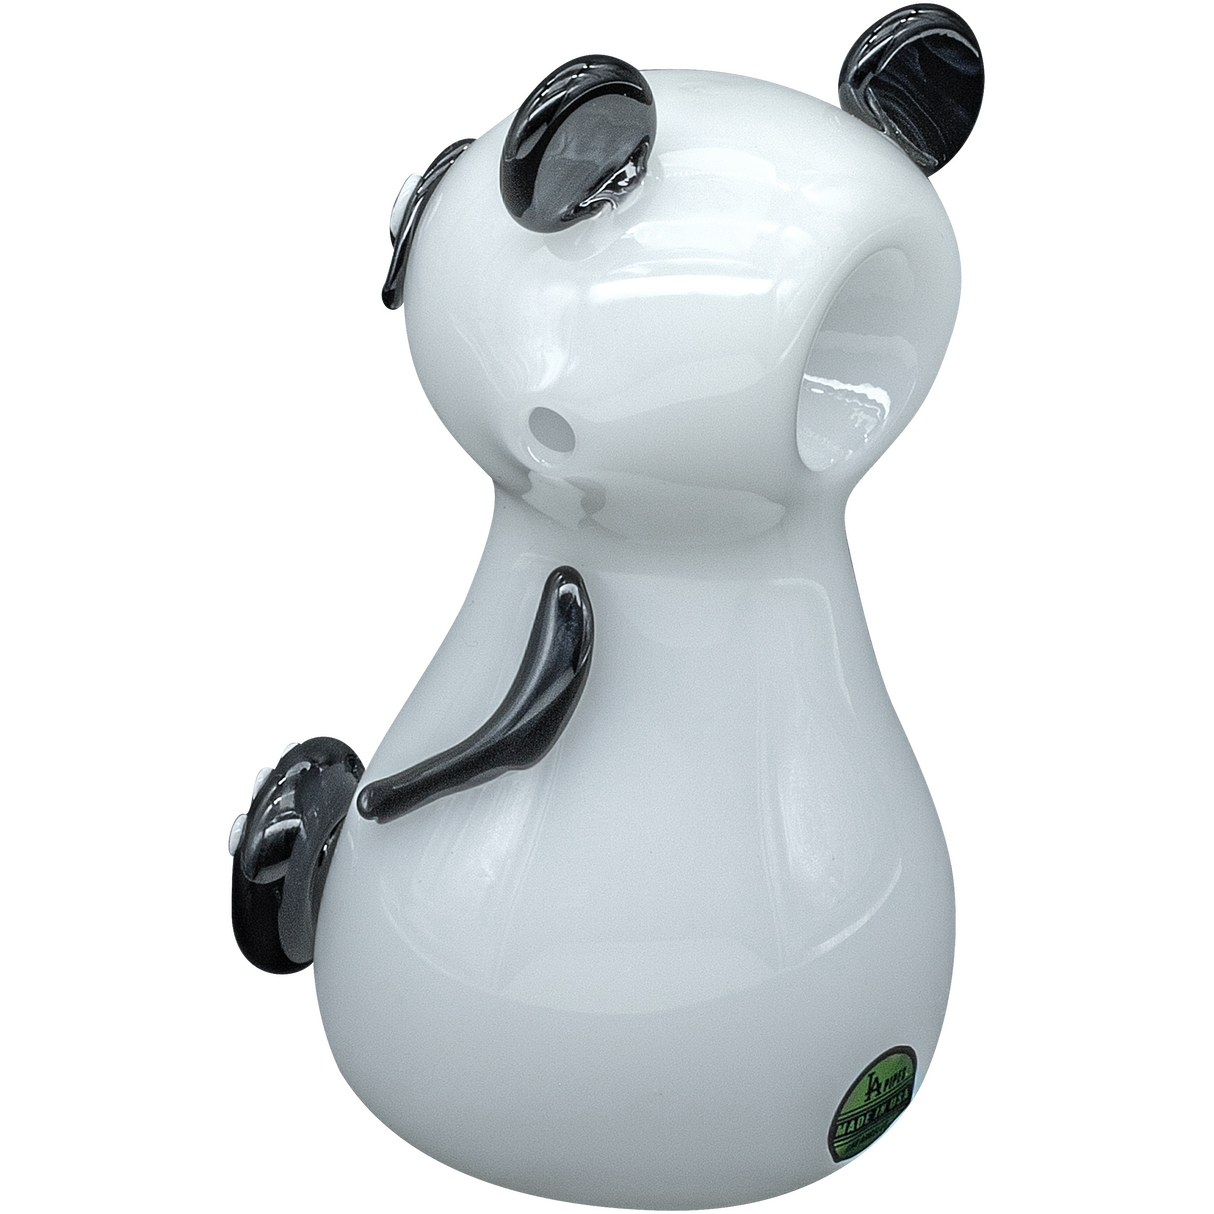 LA Pipes "Bored Panda" Spoon Glass Pipe for Dry Herbs, 4" Borosilicate - Front View